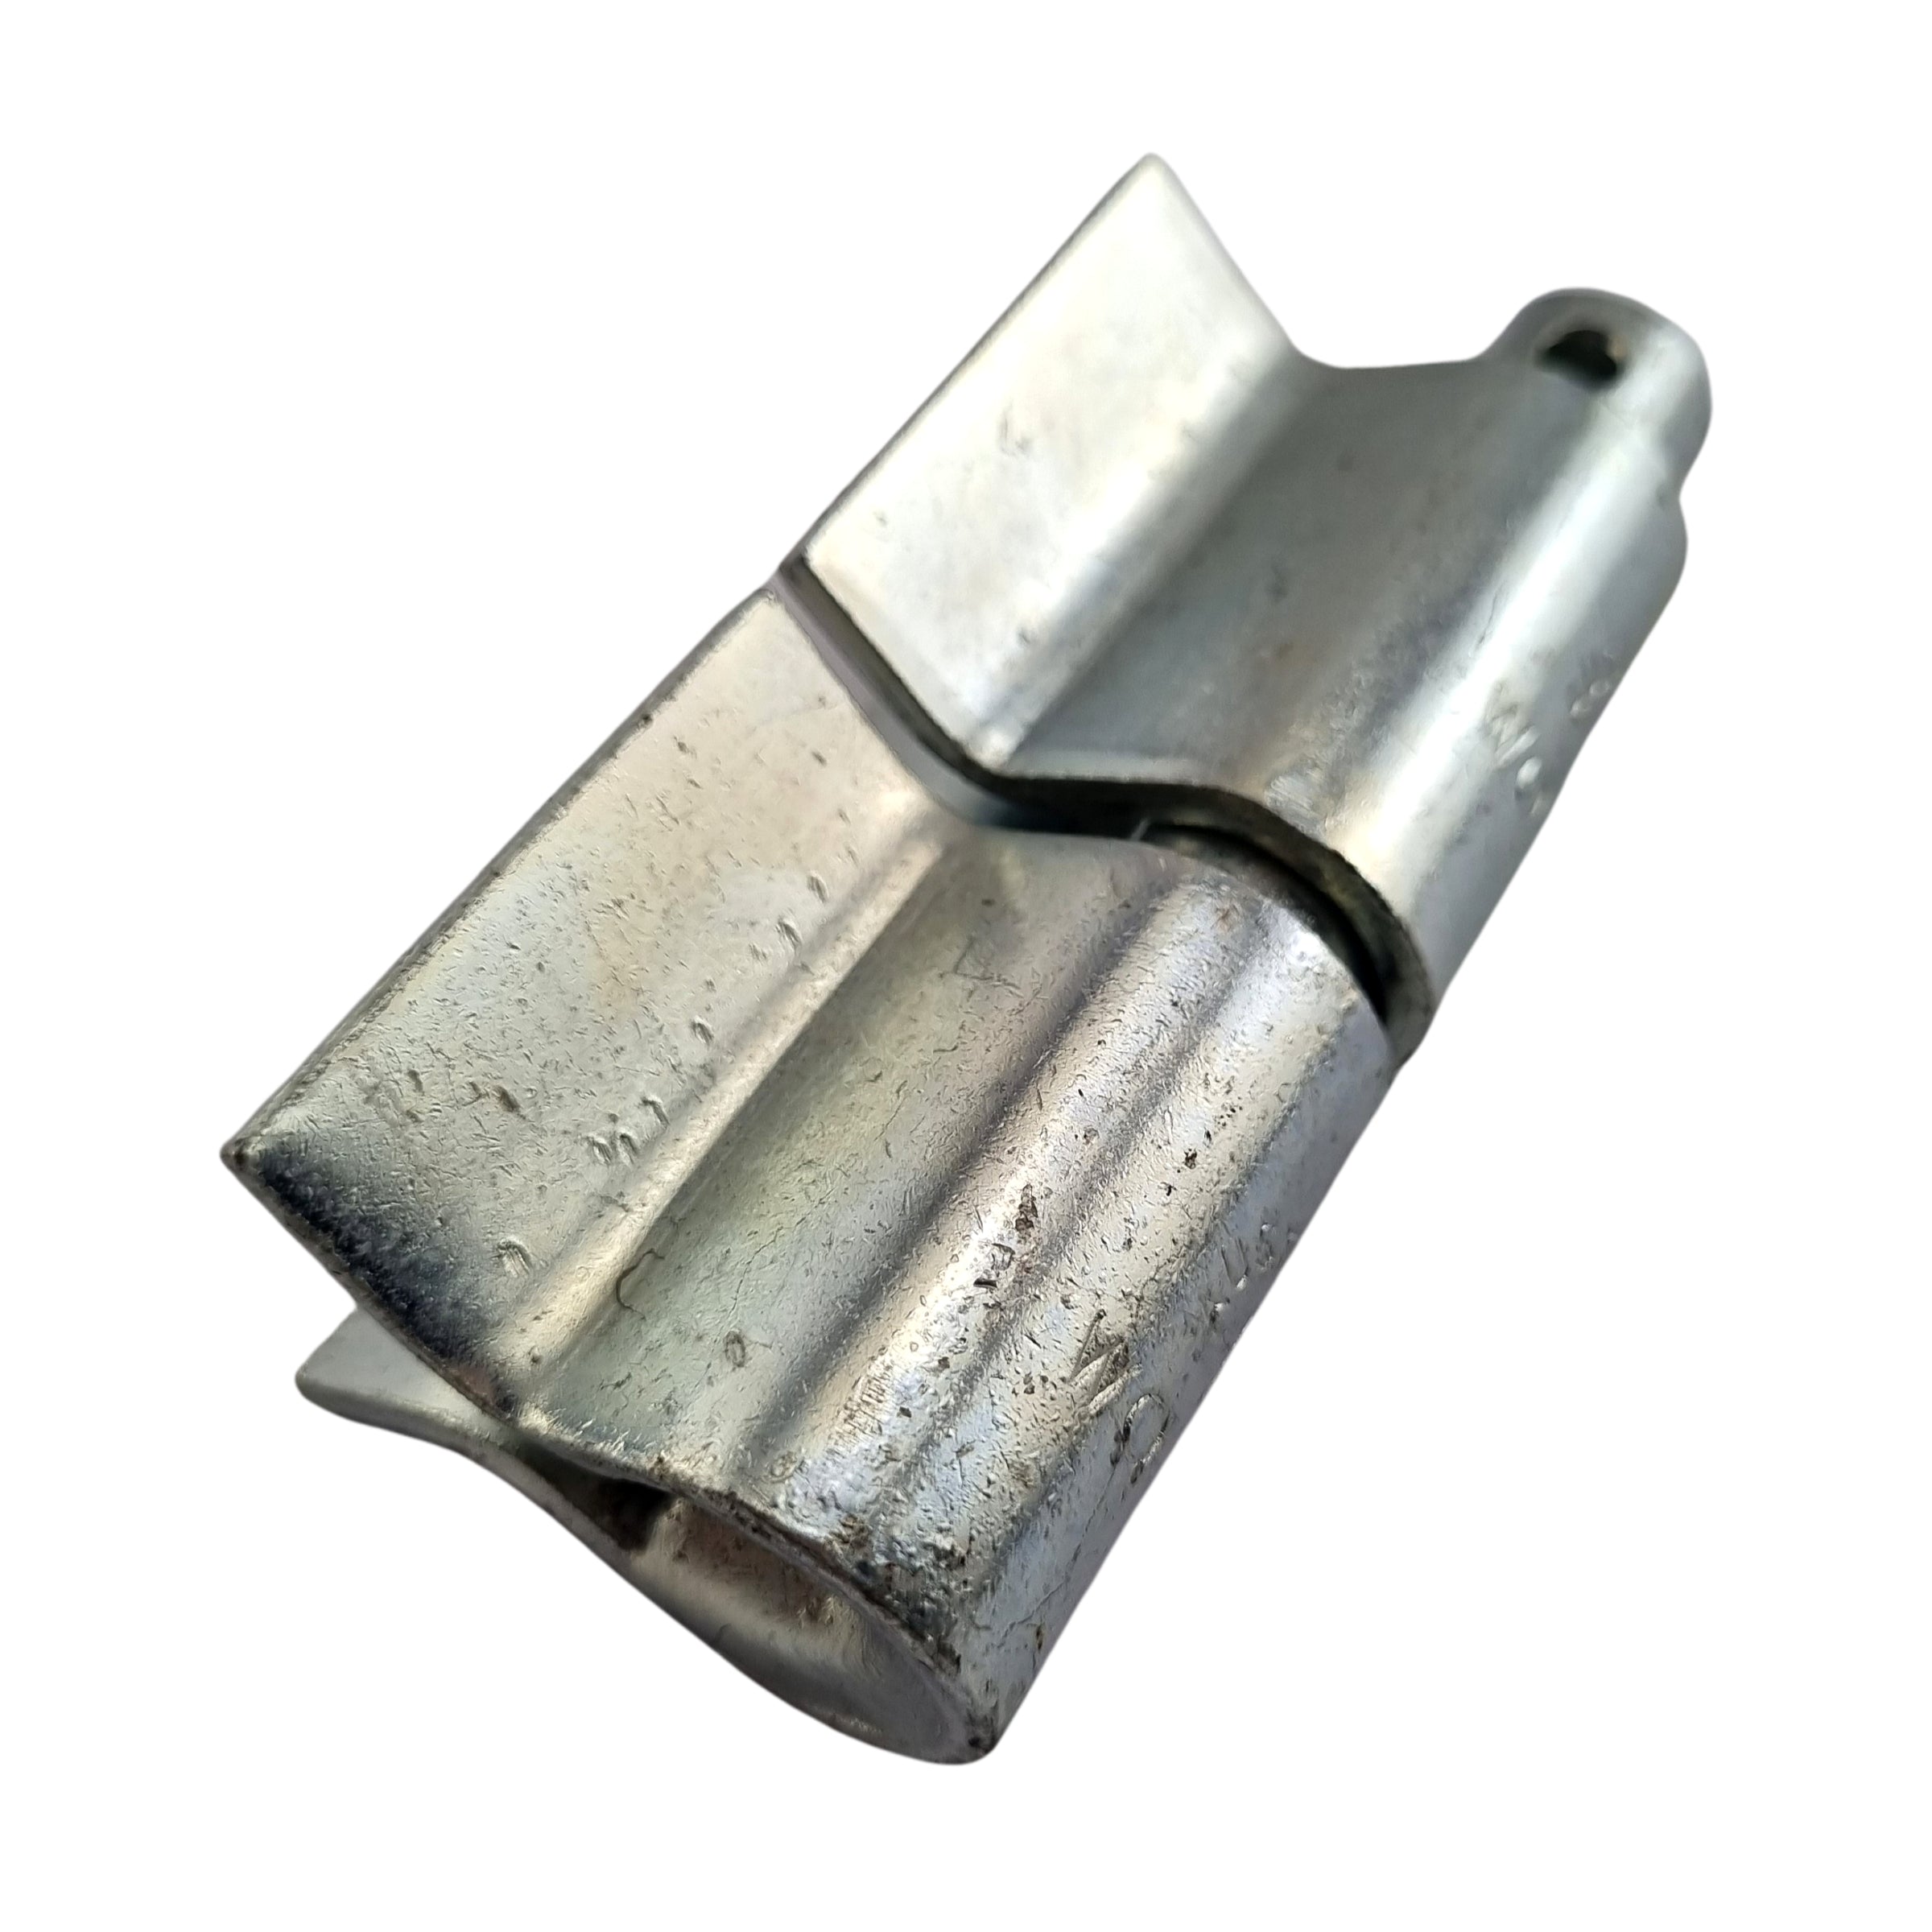 Weld On Socket - Assembly - Zinc Plated. Inc: 1 Socket + 1 Pin. Australian made. Shop fence and gate fittings online. Chain.com.au. Australia wide shipping.